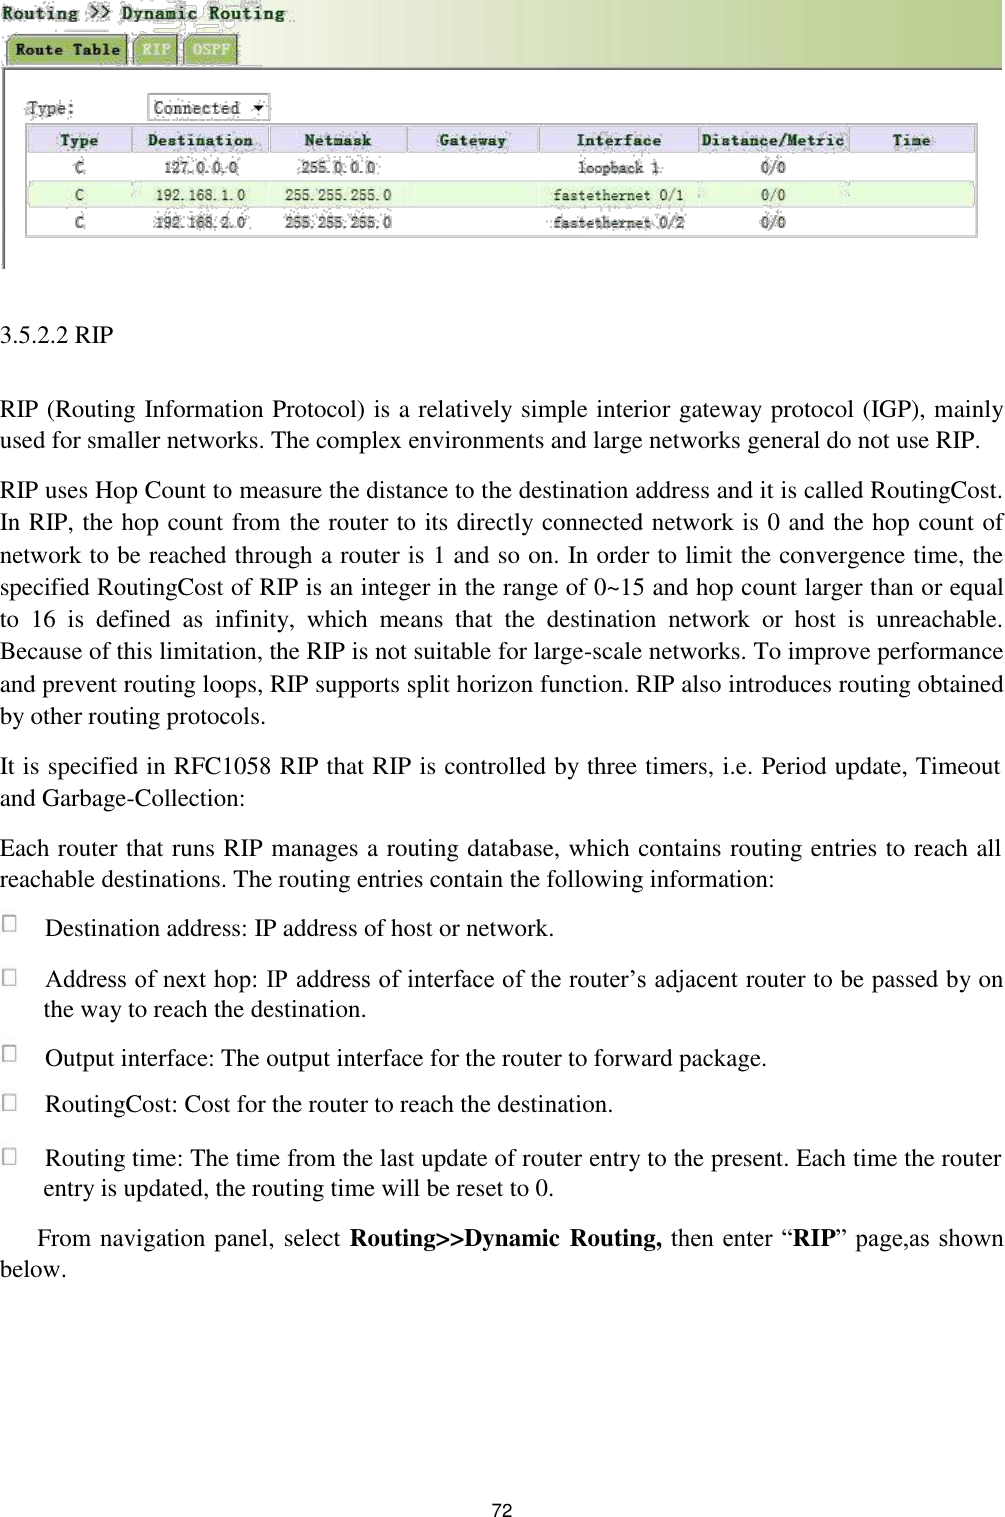               3.5.2.2 RIP   RIP (Routing Information Protocol) is a relatively simple interior gateway protocol (IGP), mainly used for smaller networks. The complex environments and large networks general do not use RIP.  RIP uses Hop Count to measure the distance to the destination address and it is called RoutingCost. In RIP, the hop count from the router to its directly connected network is 0 and the hop count of network to be reached through a router is 1 and so on. In order to limit the convergence time, the specified RoutingCost of RIP is an integer in the range of 0~15 and hop count larger than or equal to  16  is  defined  as  infinity,  which  means  that  the  destination  network  or  host  is  unreachable. Because of this limitation, the RIP is not suitable for large-scale networks. To improve performance and prevent routing loops, RIP supports split horizon function. RIP also introduces routing obtained by other routing protocols.  It is specified in RFC1058 RIP that RIP is controlled by three timers, i.e. Period update, Timeout and Garbage-Collection:  Each router that runs RIP manages a routing database, which contains routing entries to reach all reachable destinations. The routing entries contain the following information:   Destination address: IP address of host or network.   Address of next hop: IP address of interface of the router’s adjacent router to be passed by on the way to reach the destination.   Output interface: The output interface for the router to forward package.   RoutingCost: Cost for the router to reach the destination.   Routing time: The time from the last update of router entry to the present. Each time the router entry is updated, the routing time will be reset to 0.  From navigation panel, select Routing&gt;&gt;Dynamic Routing, then enter “RIP” page,as shown below.           72 